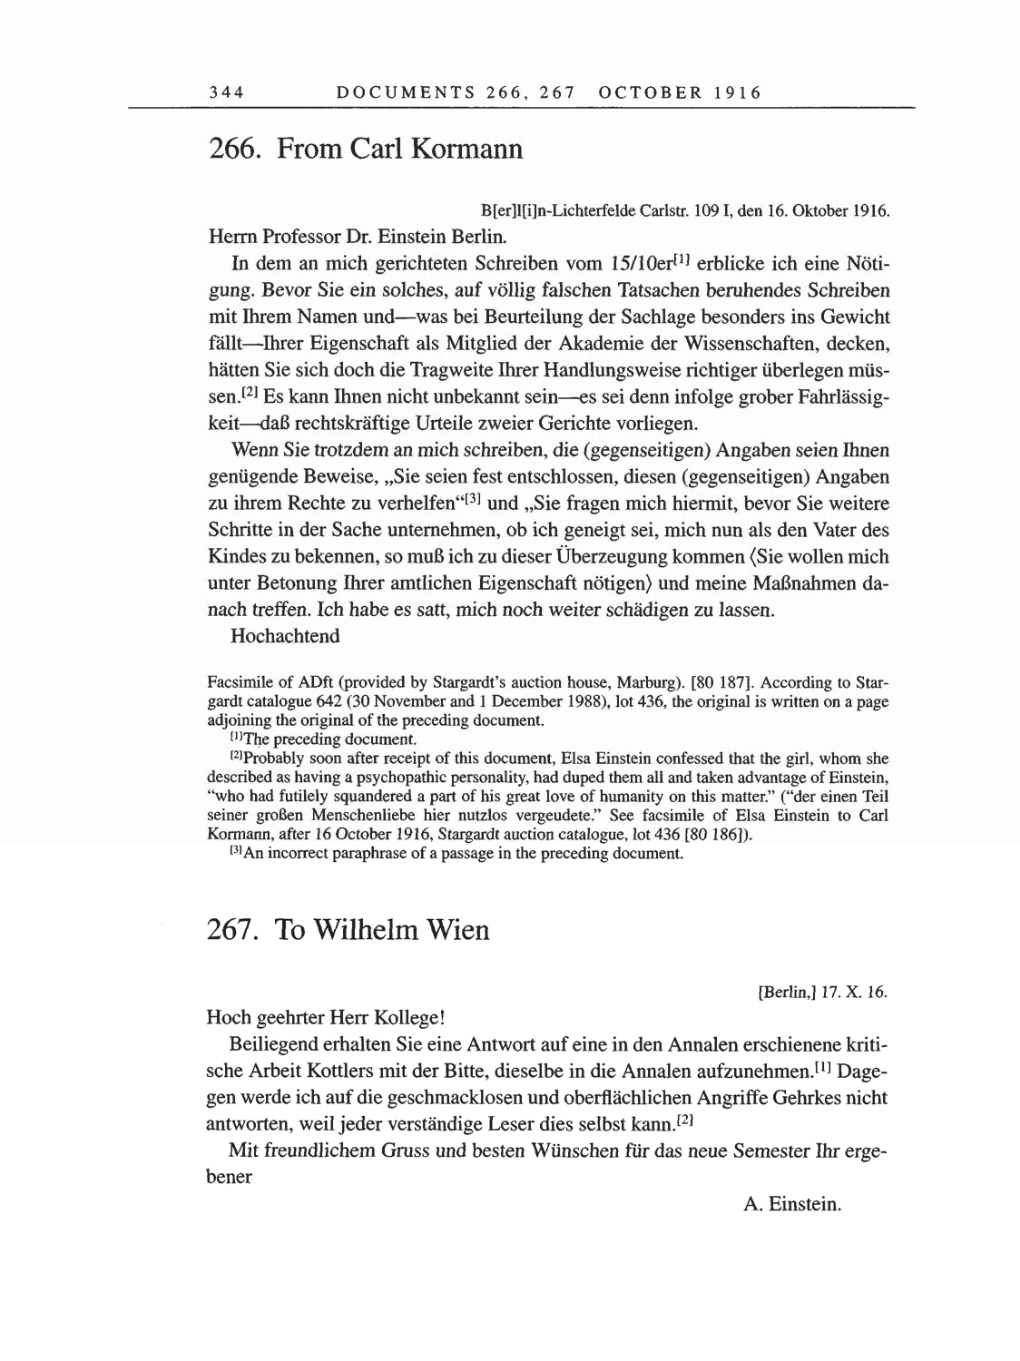 Volume 8, Part A: The Berlin Years: Correspondence 1914-1917 page 344